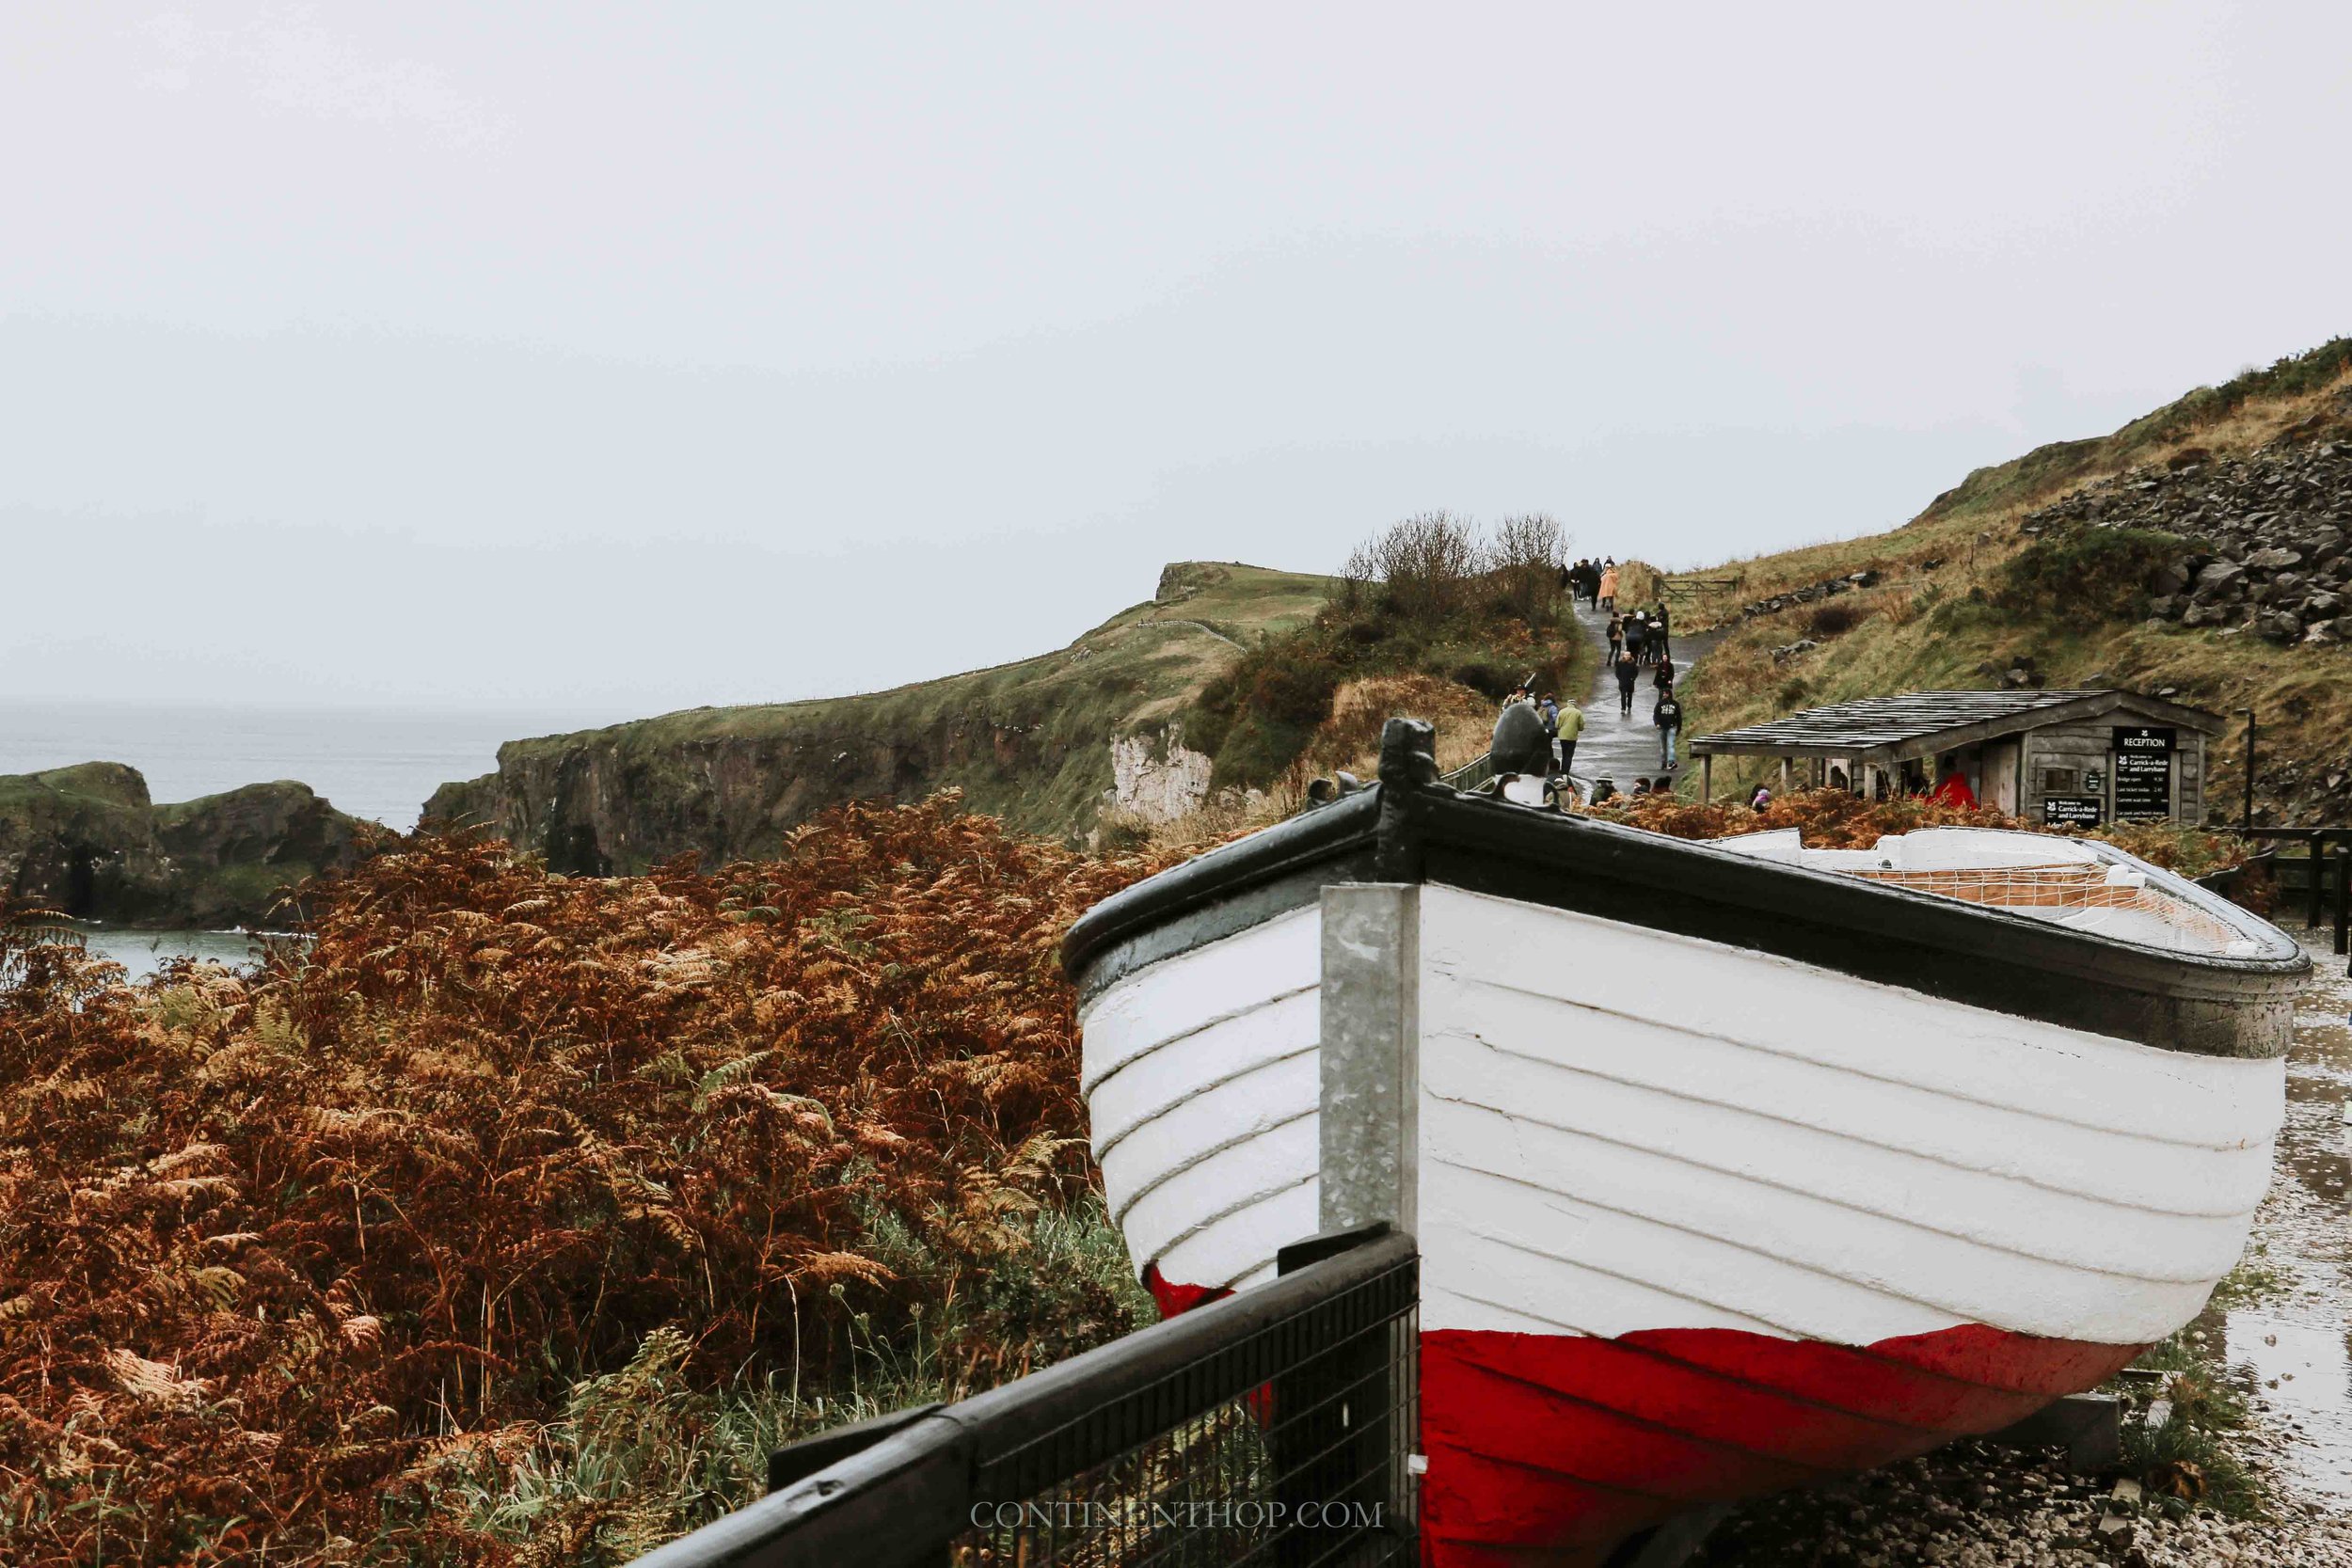 A white and red boat on the way to carrick a rede from belfast to giants causeway